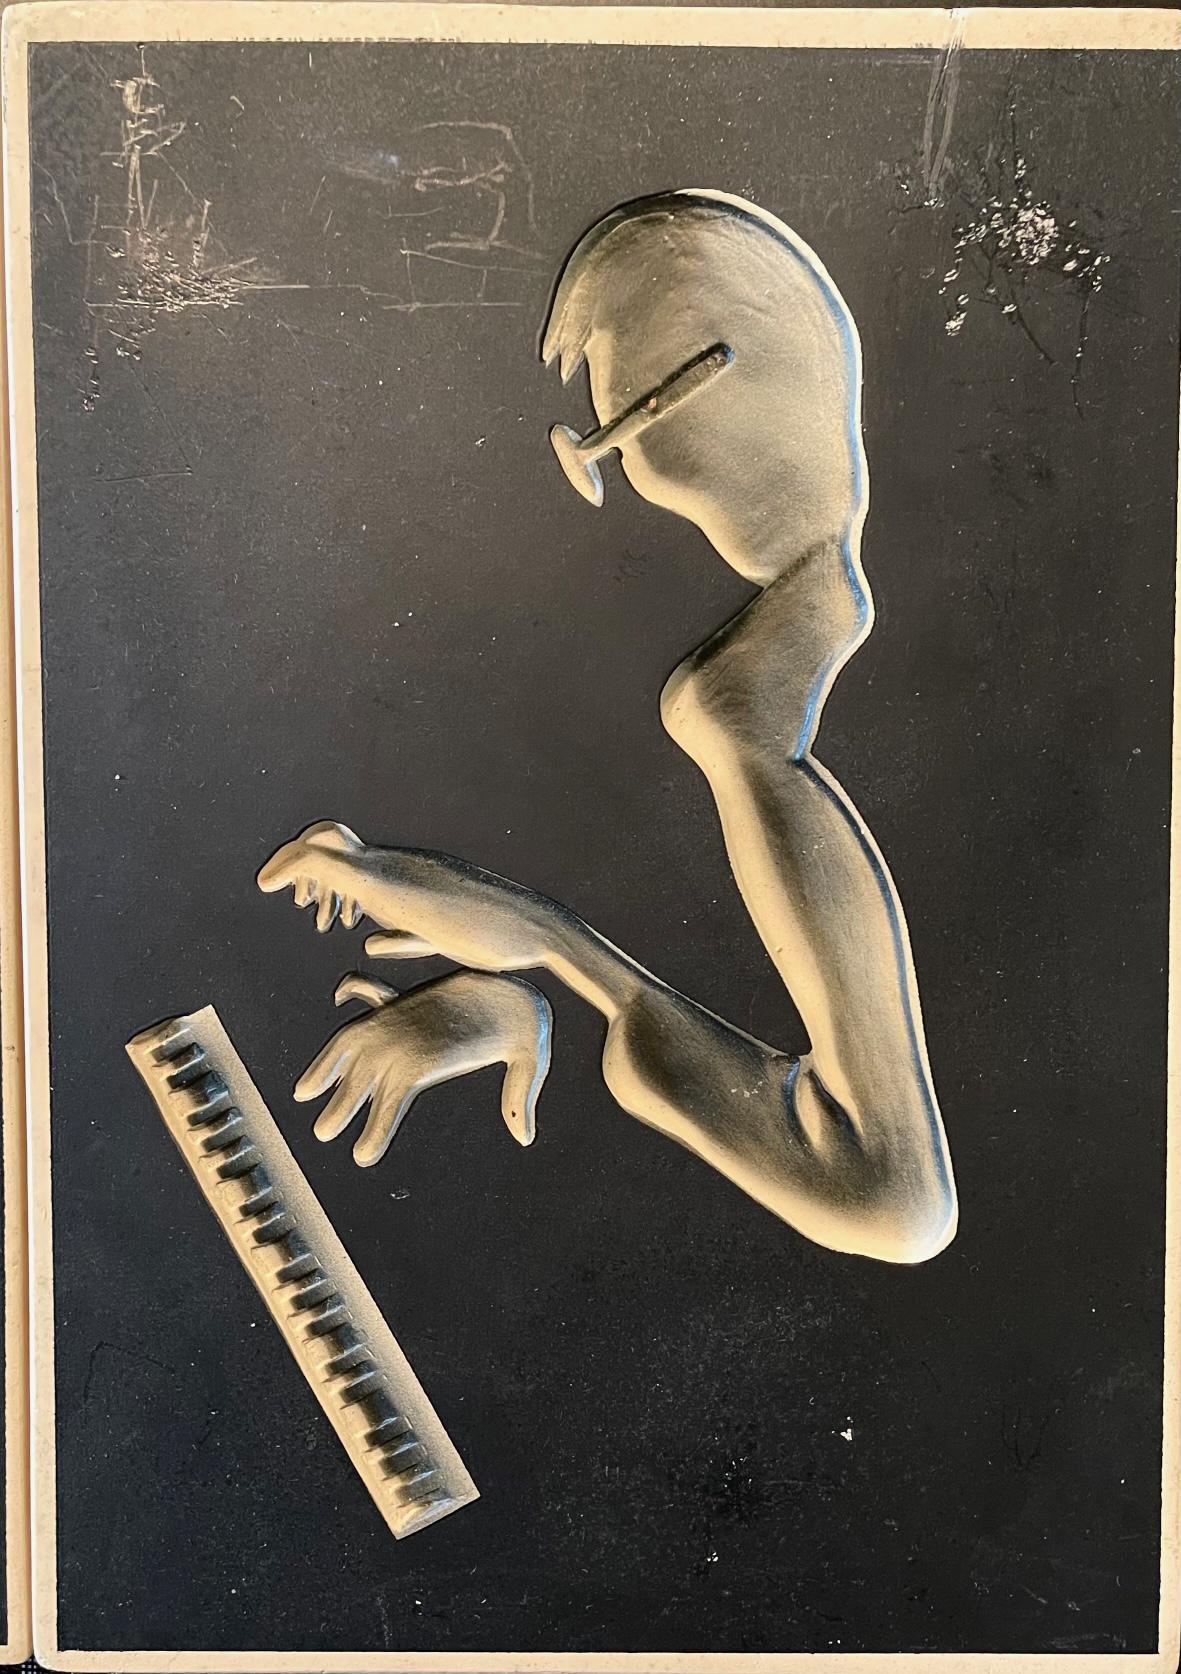 JAZZ MUSICIANS - FOUR WALL PLAQUES - Black Figurative Sculpture by Unknown